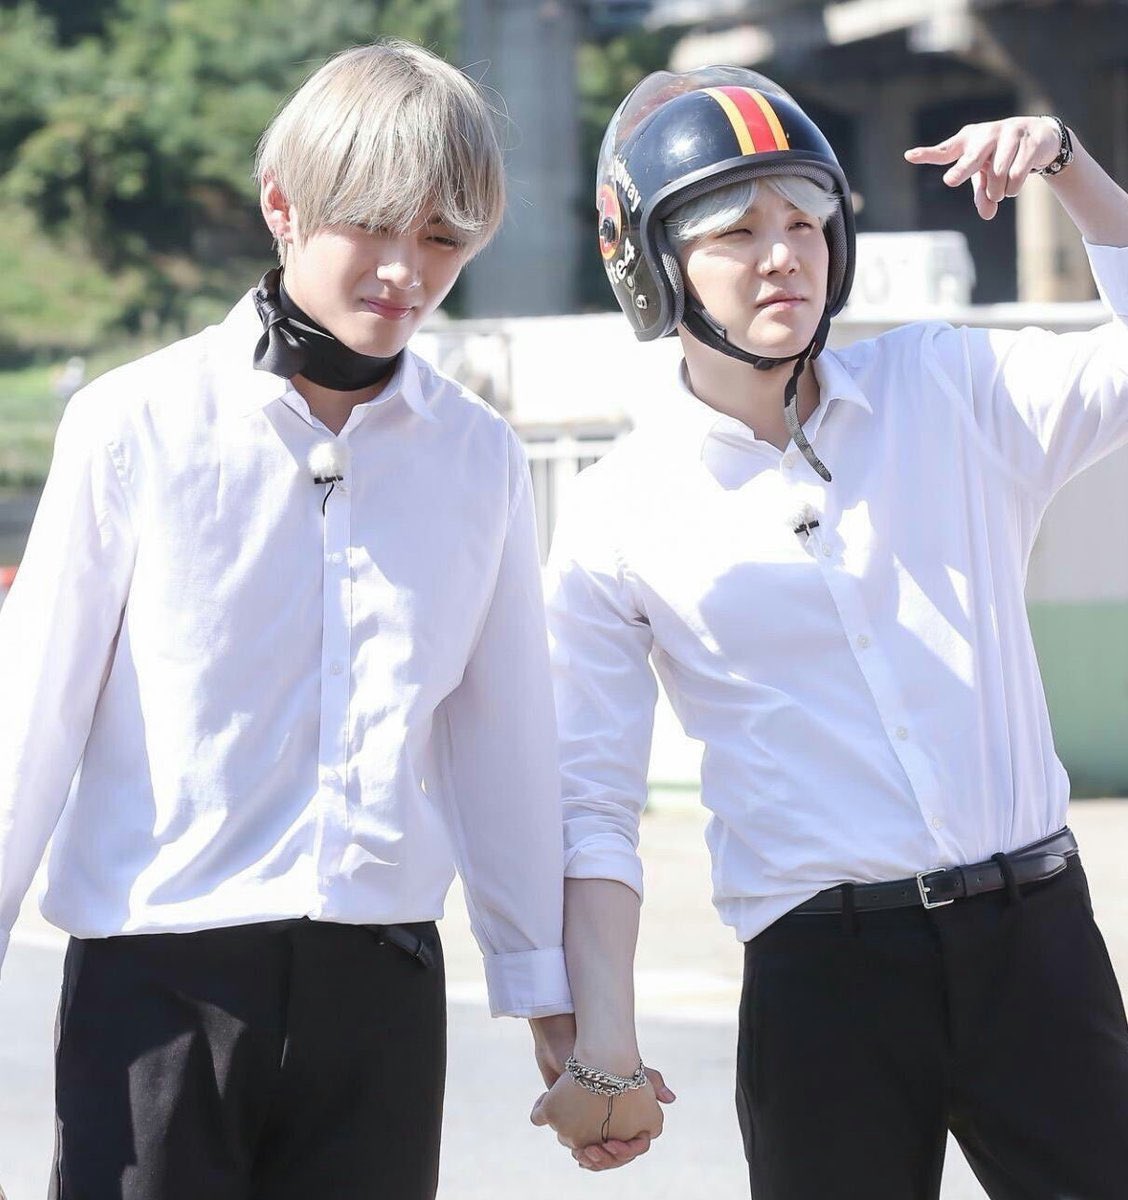 ofc the holding hands team